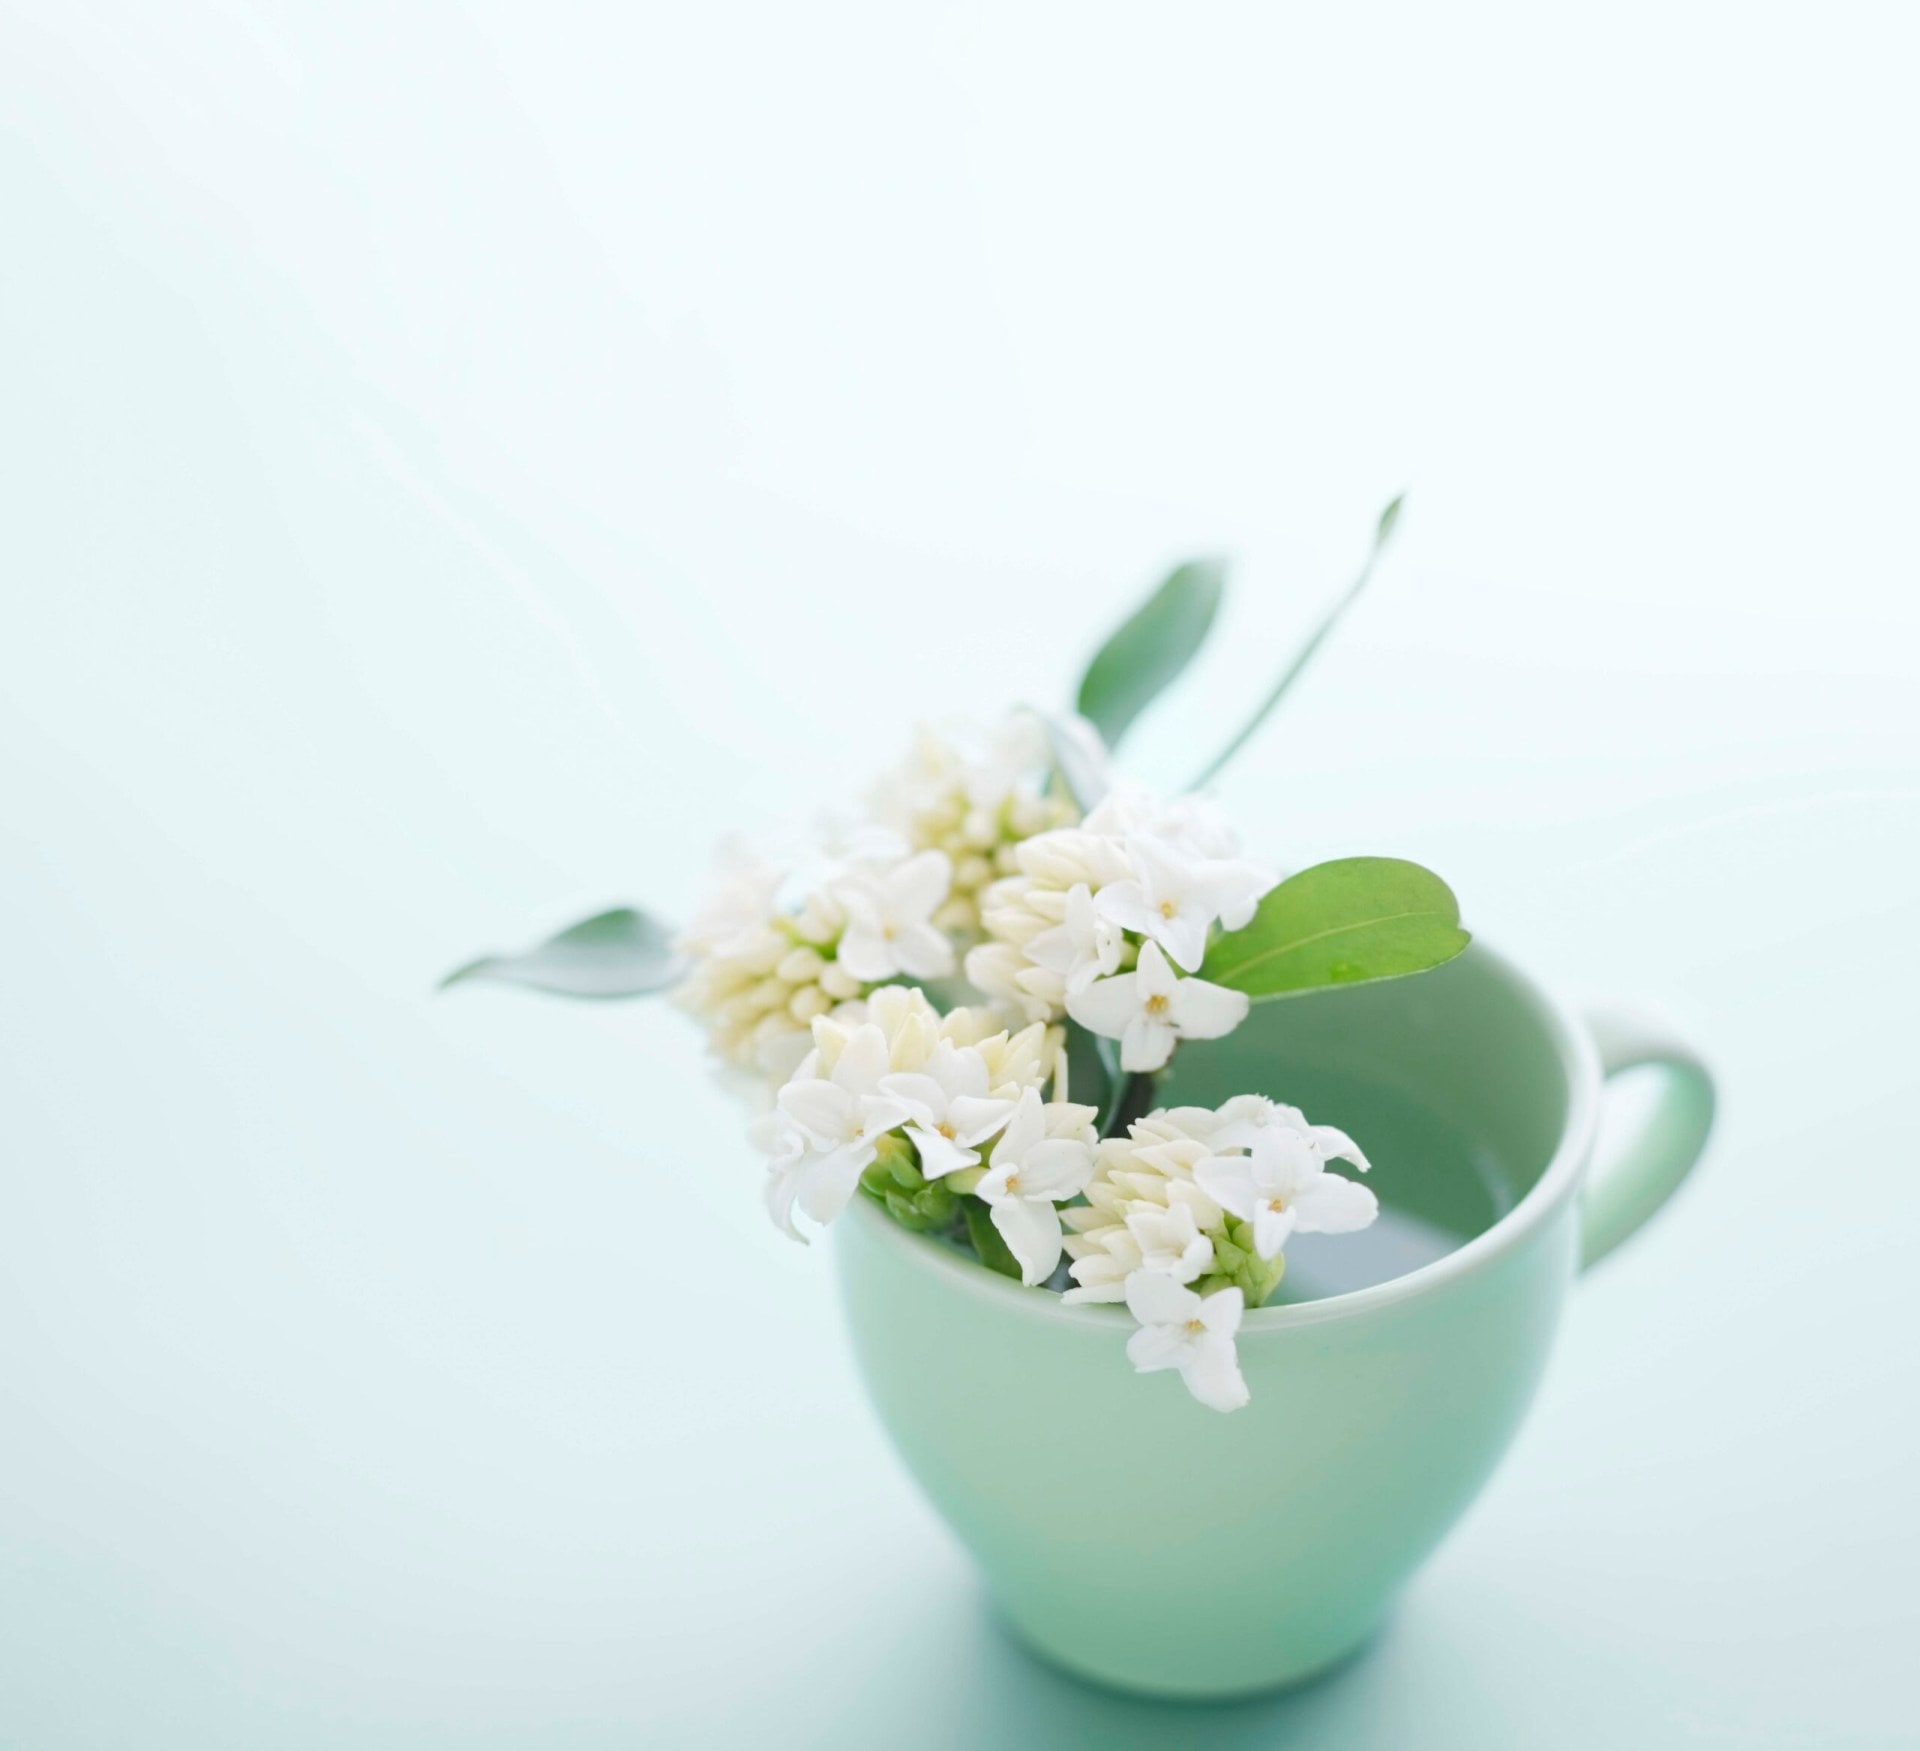 White daphne flower in a green teacup filled with water